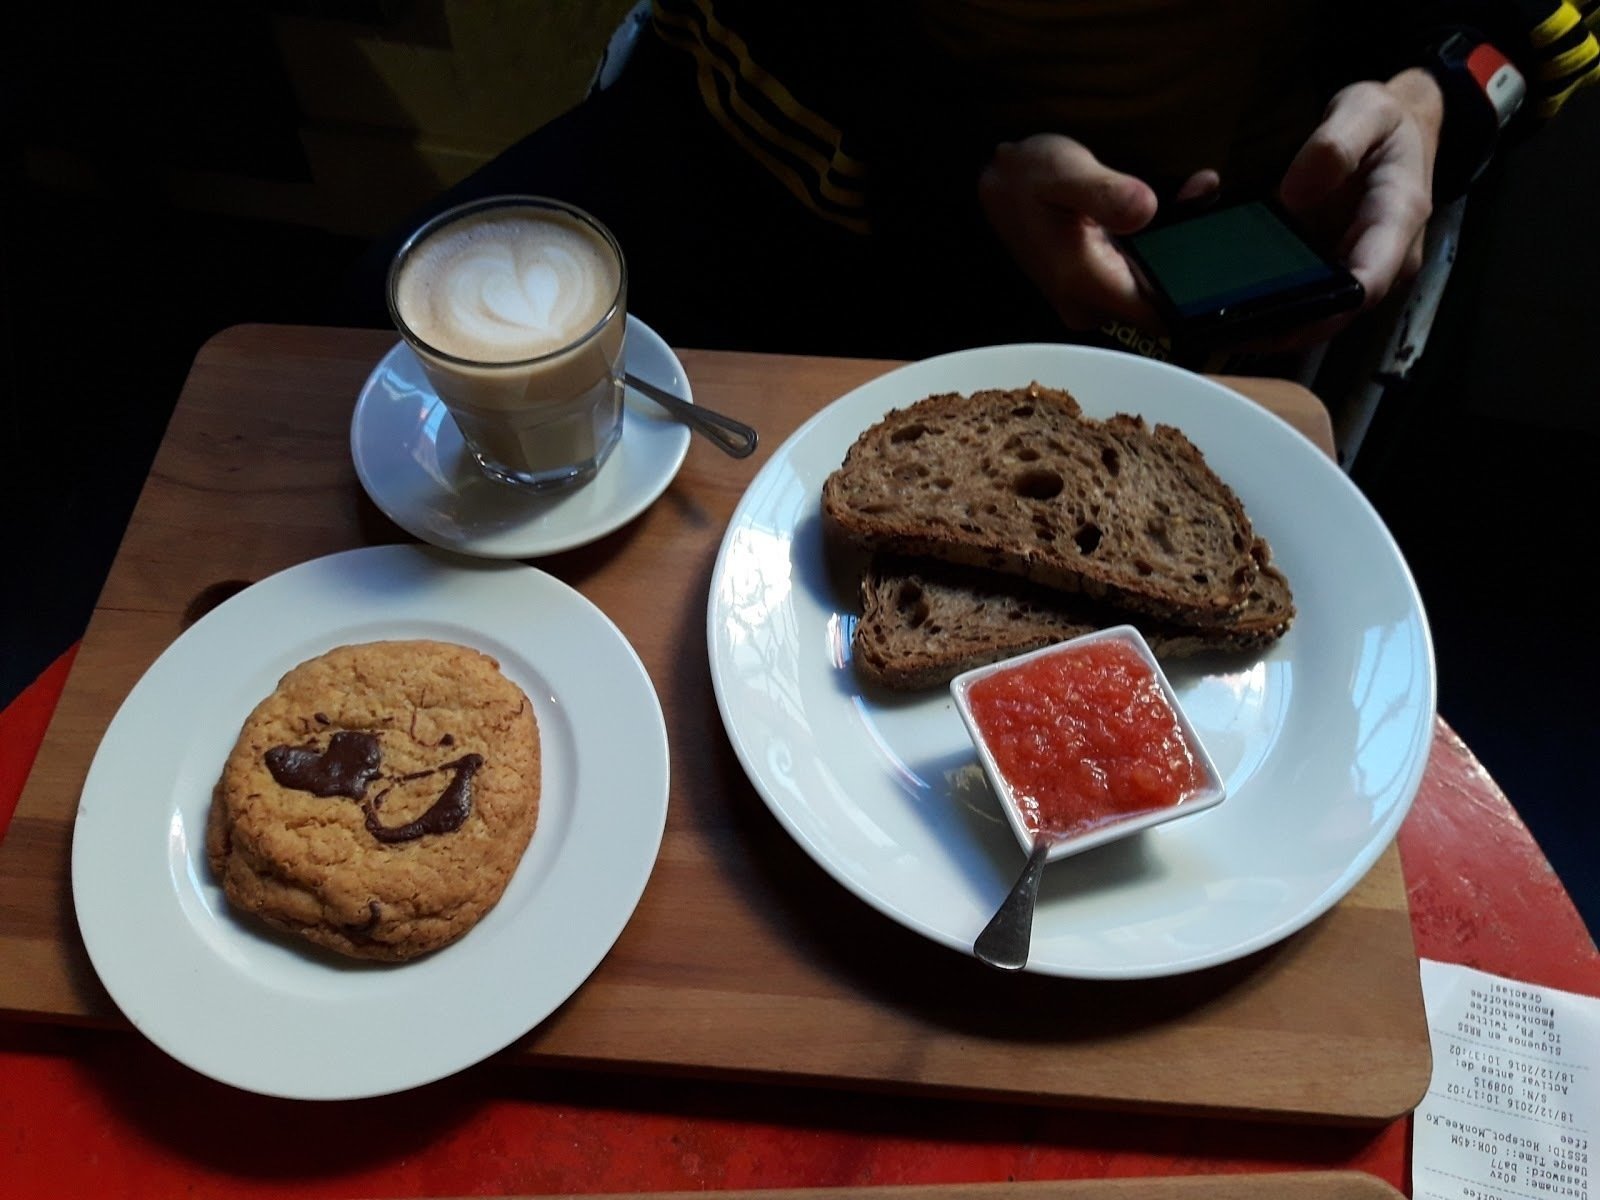 <span class="translation_missing" title="translation missing: en.meta.location_title, location_name: Monkee Koffee, city: Madrid">Location Title</span>